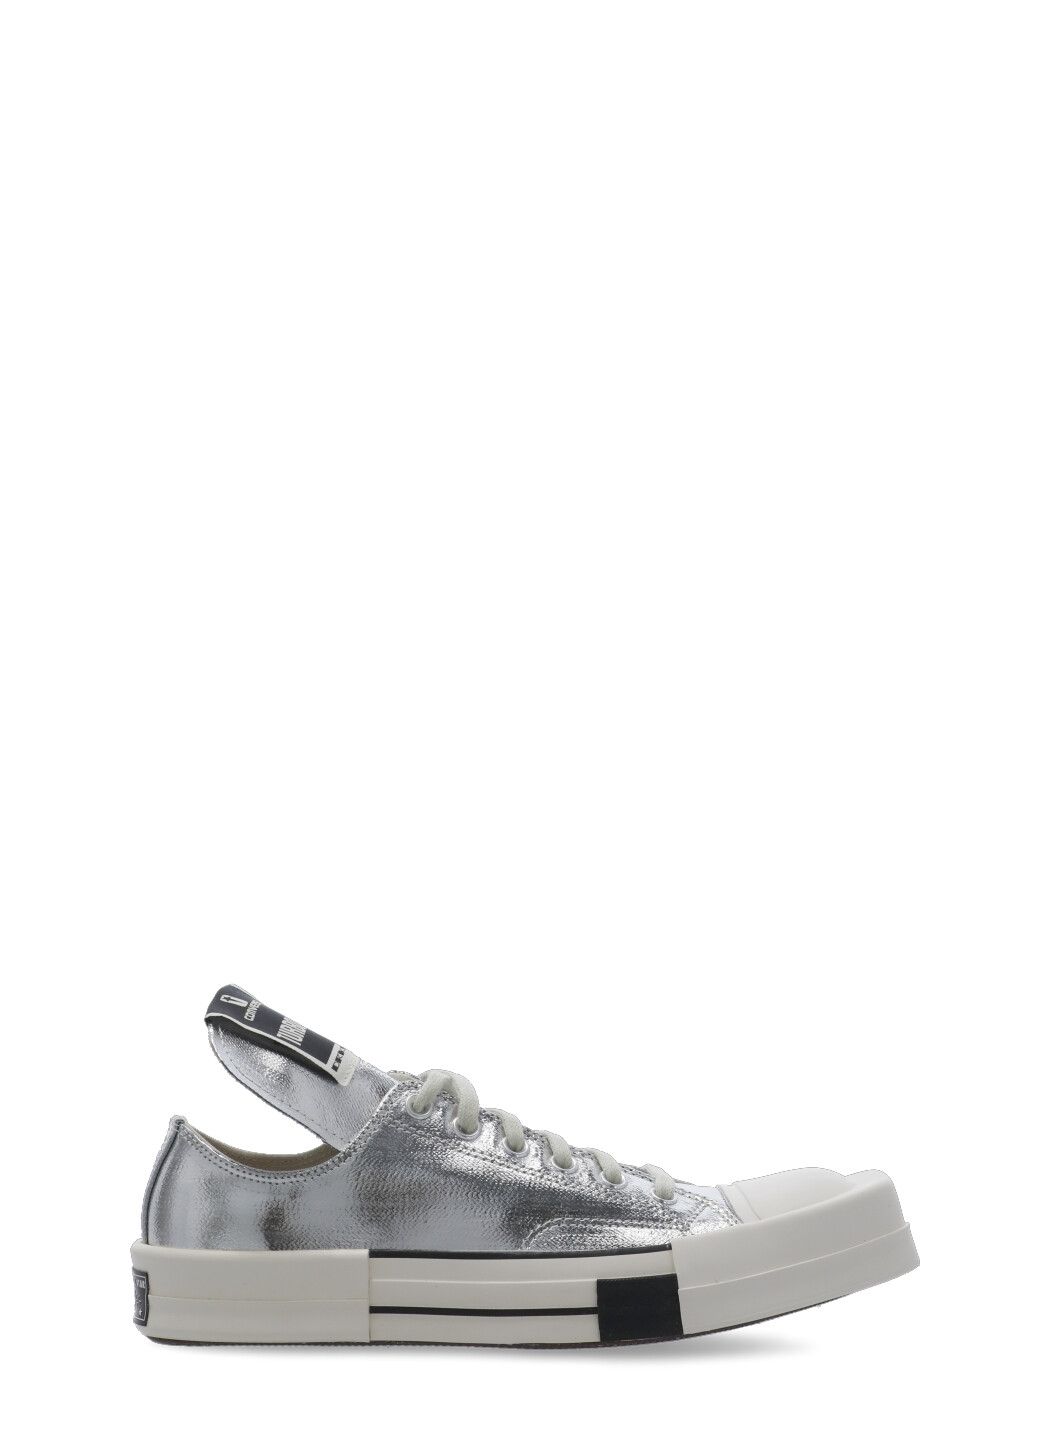 Converse x Rick Owens:Sneakers TurboDRX